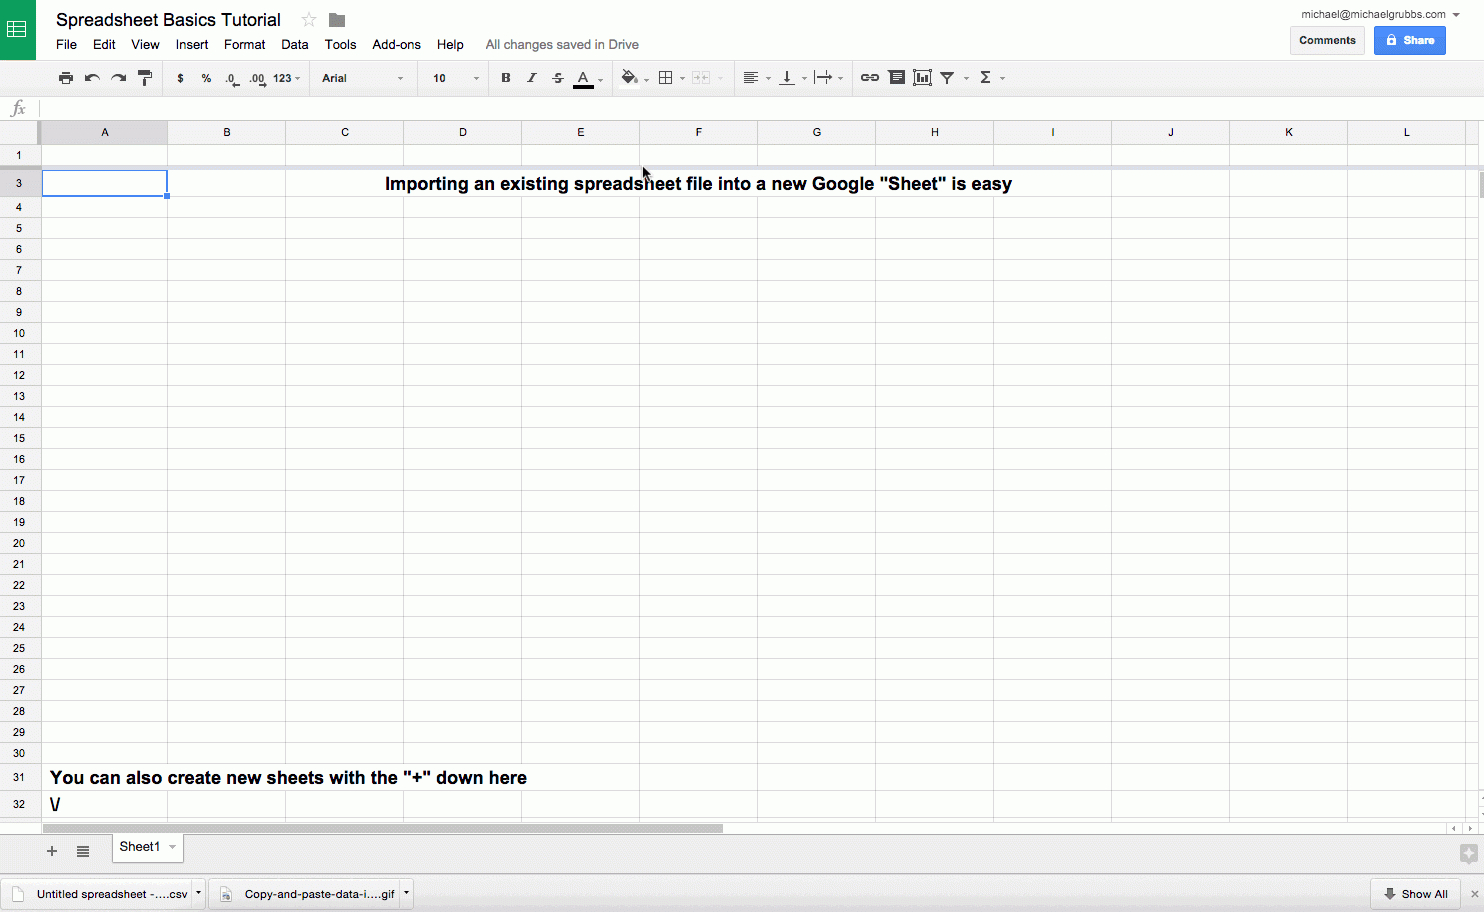 how-do-you-make-a-spreadsheet-shared-in-excel-db-excel